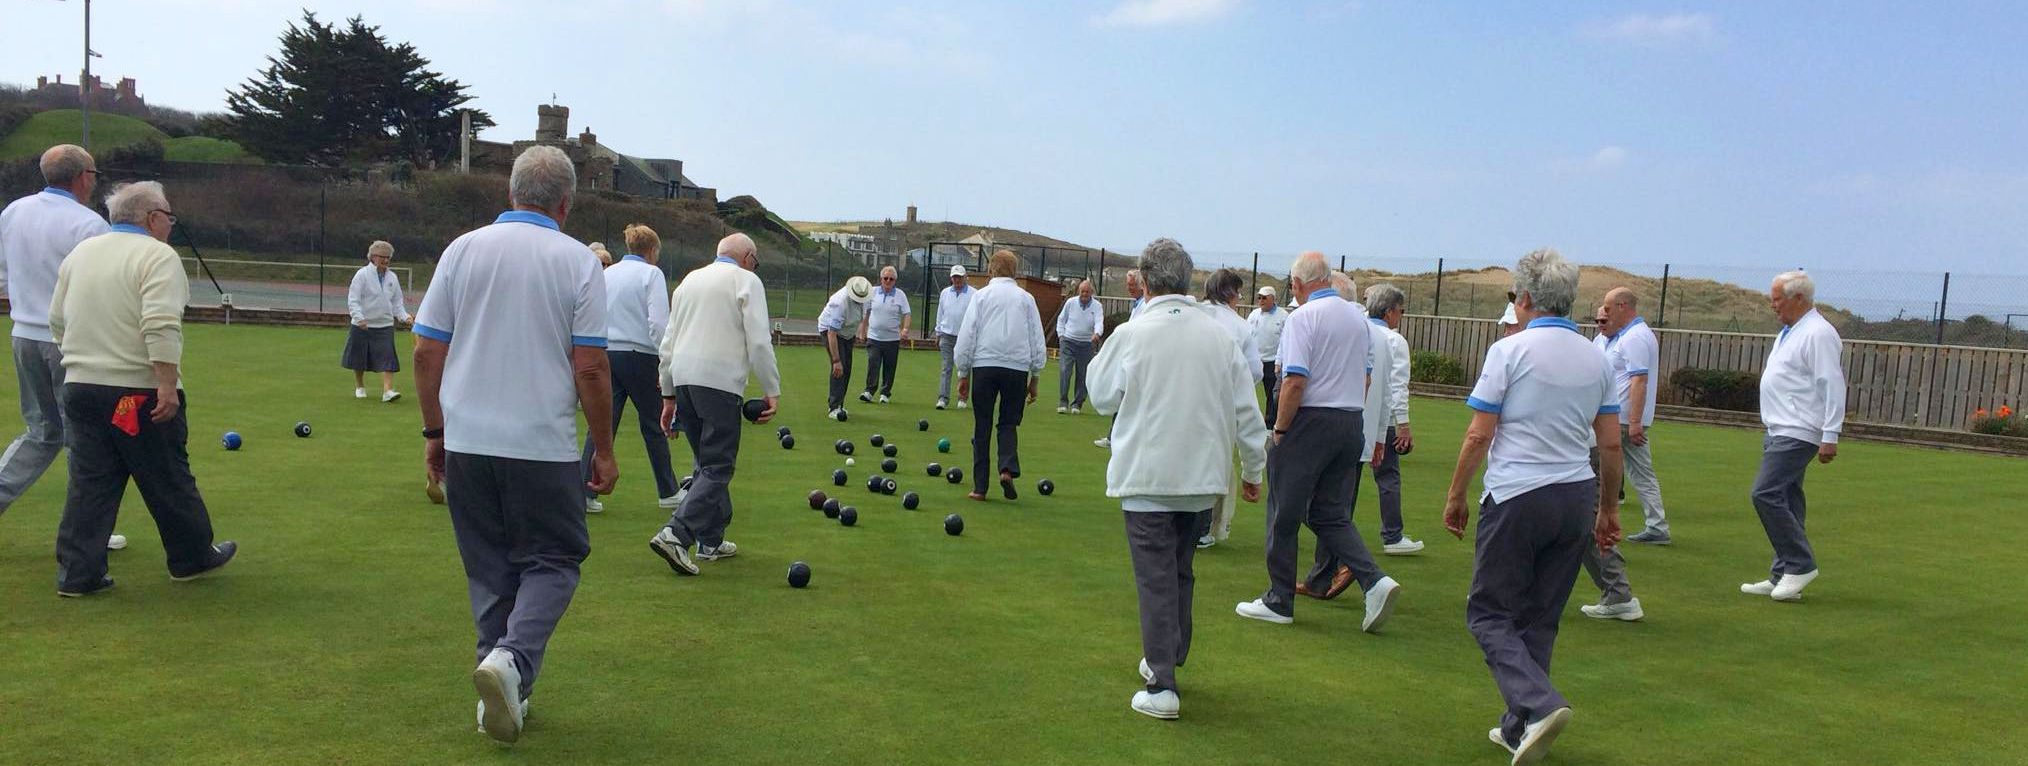 Players on the bowling green with a sea view in the background